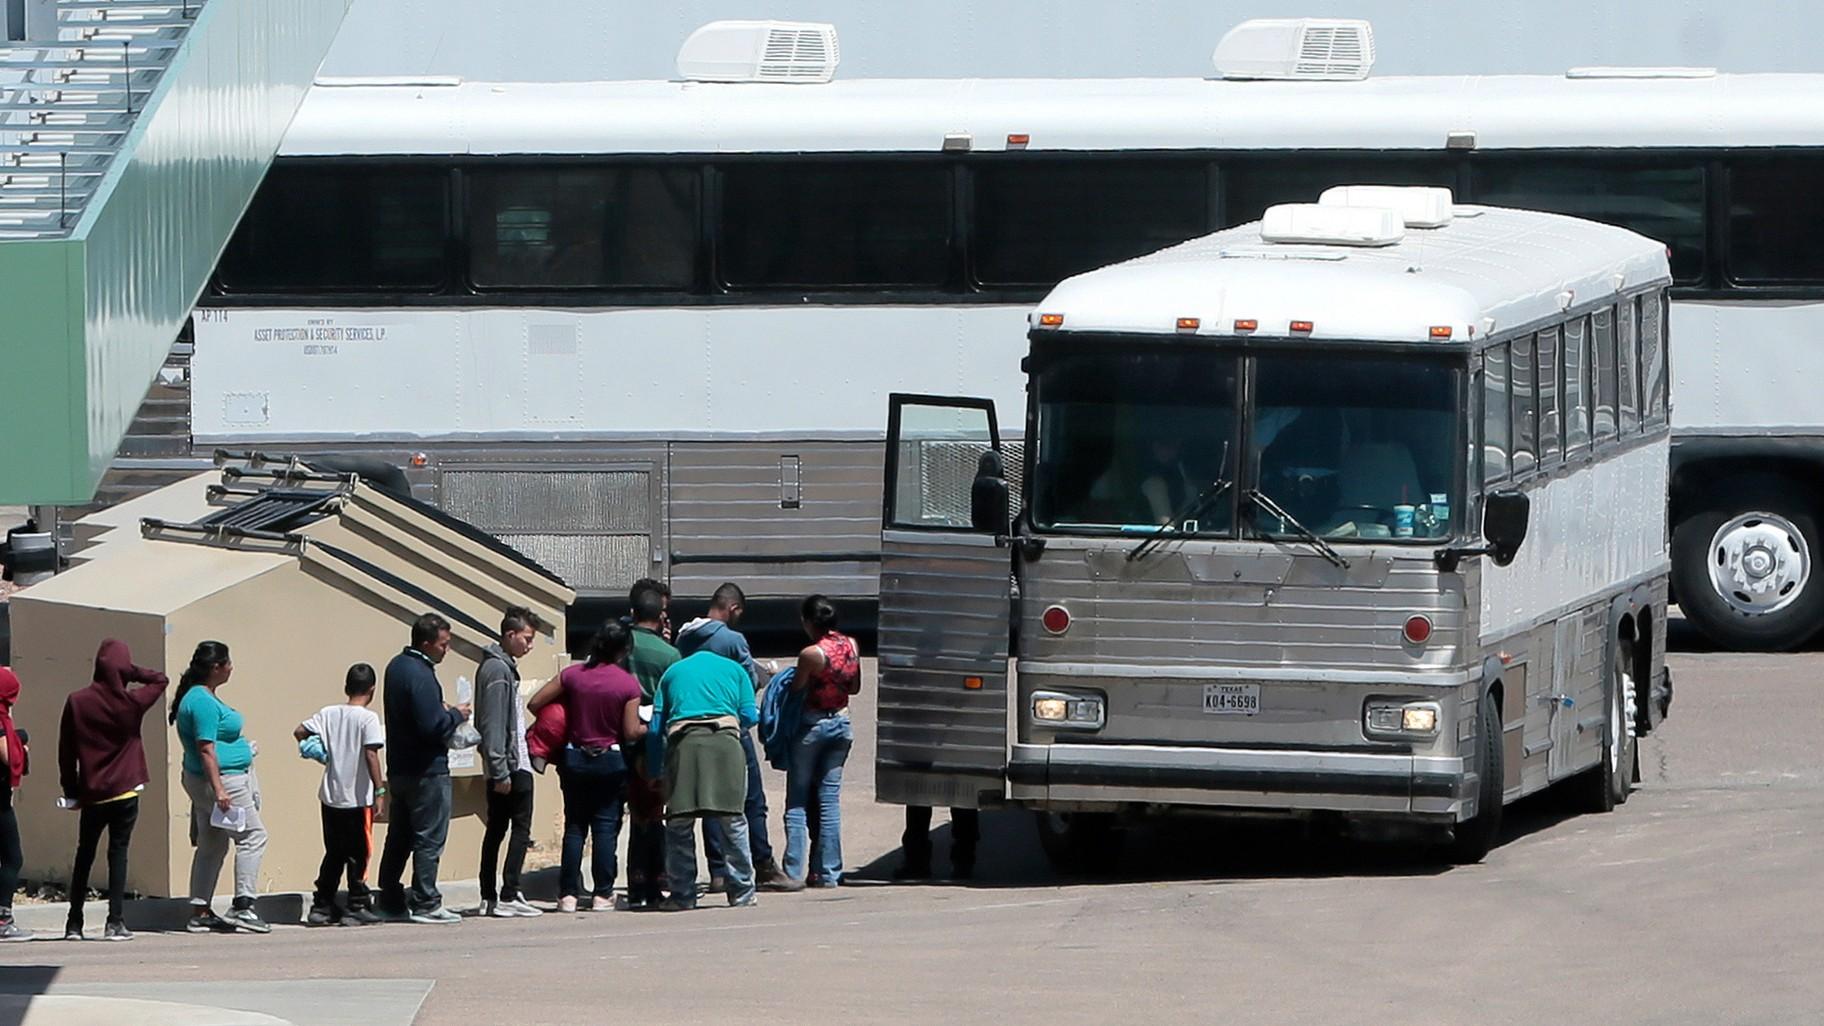 In this April 20, 2019 file photo, migrants are loaded onto a bus at the Border Patrol headquarters on Hondo Pass, in El Paso, Texas. (Mark Lambie / The El Paso Times via AP, File)